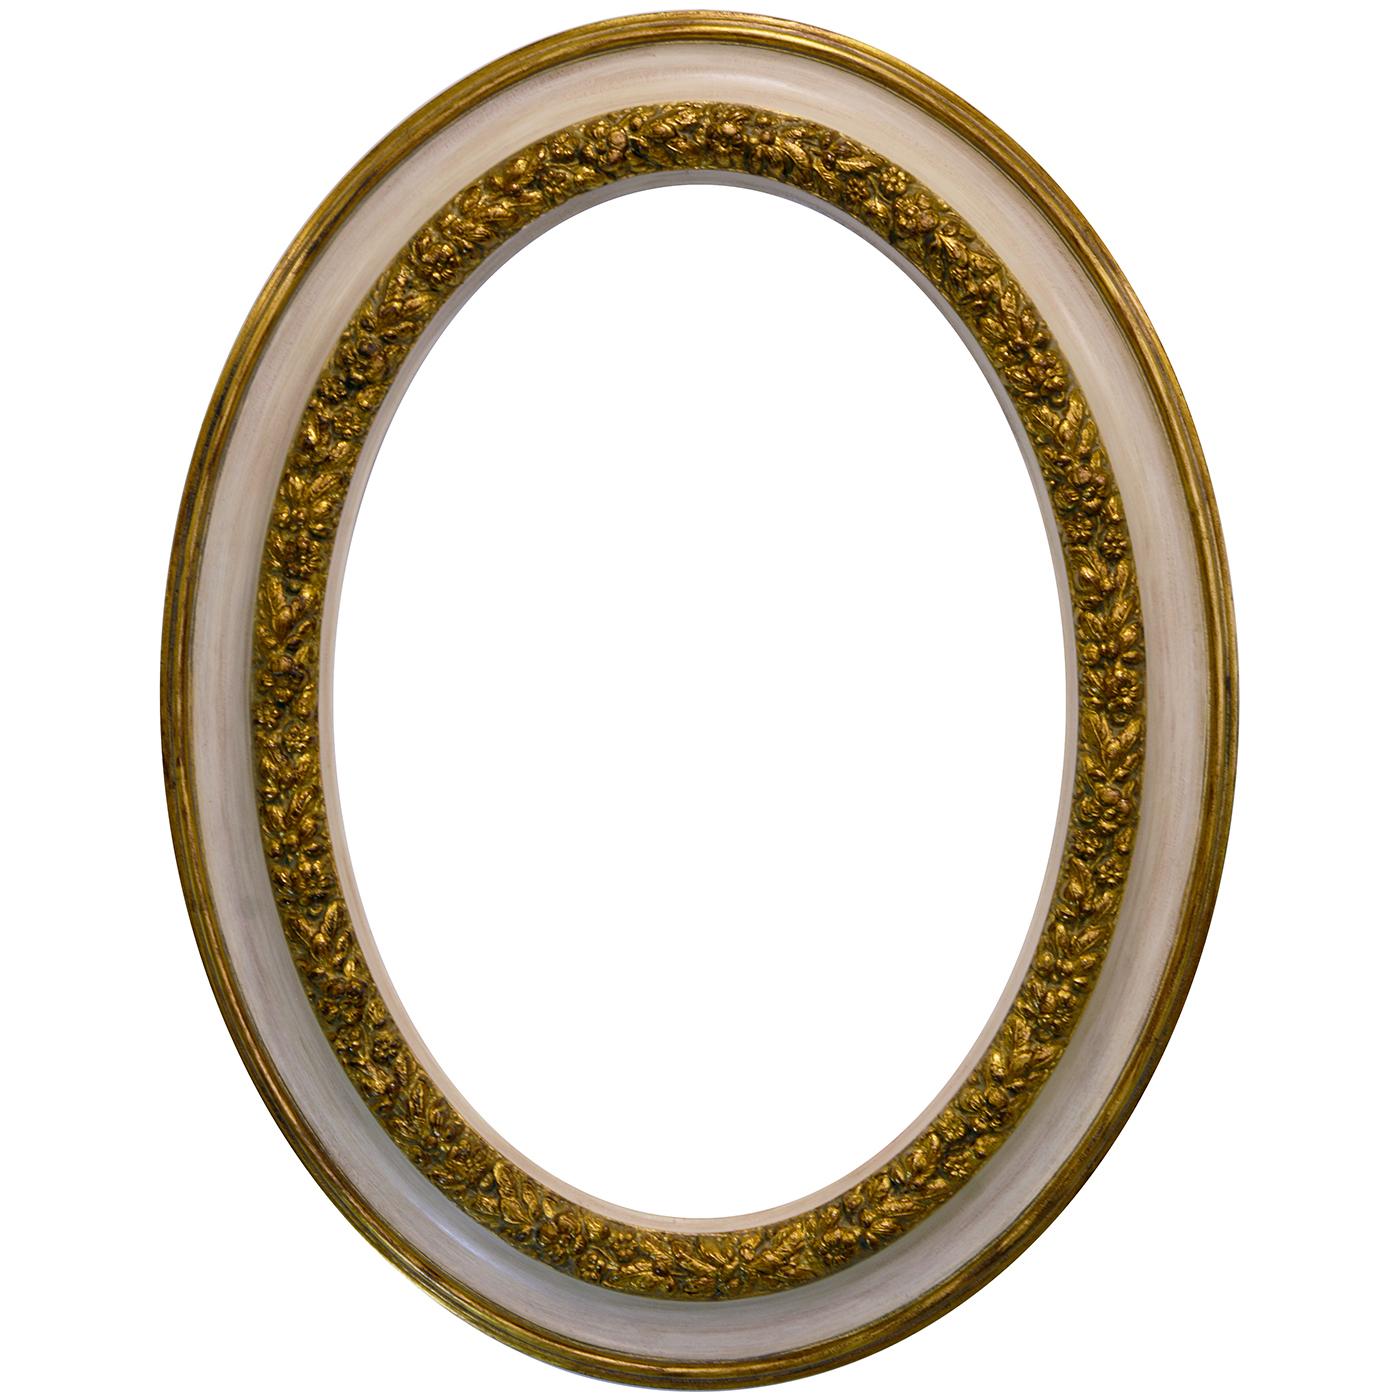 Clean and classic, this gorgeous oval wall mirror is distinguished by a remarkably sophisticated frame handmade of wood decorated with patinated gold leaf and lacquered in ivory white. The internal rim of the frame is exquisitely embellished with